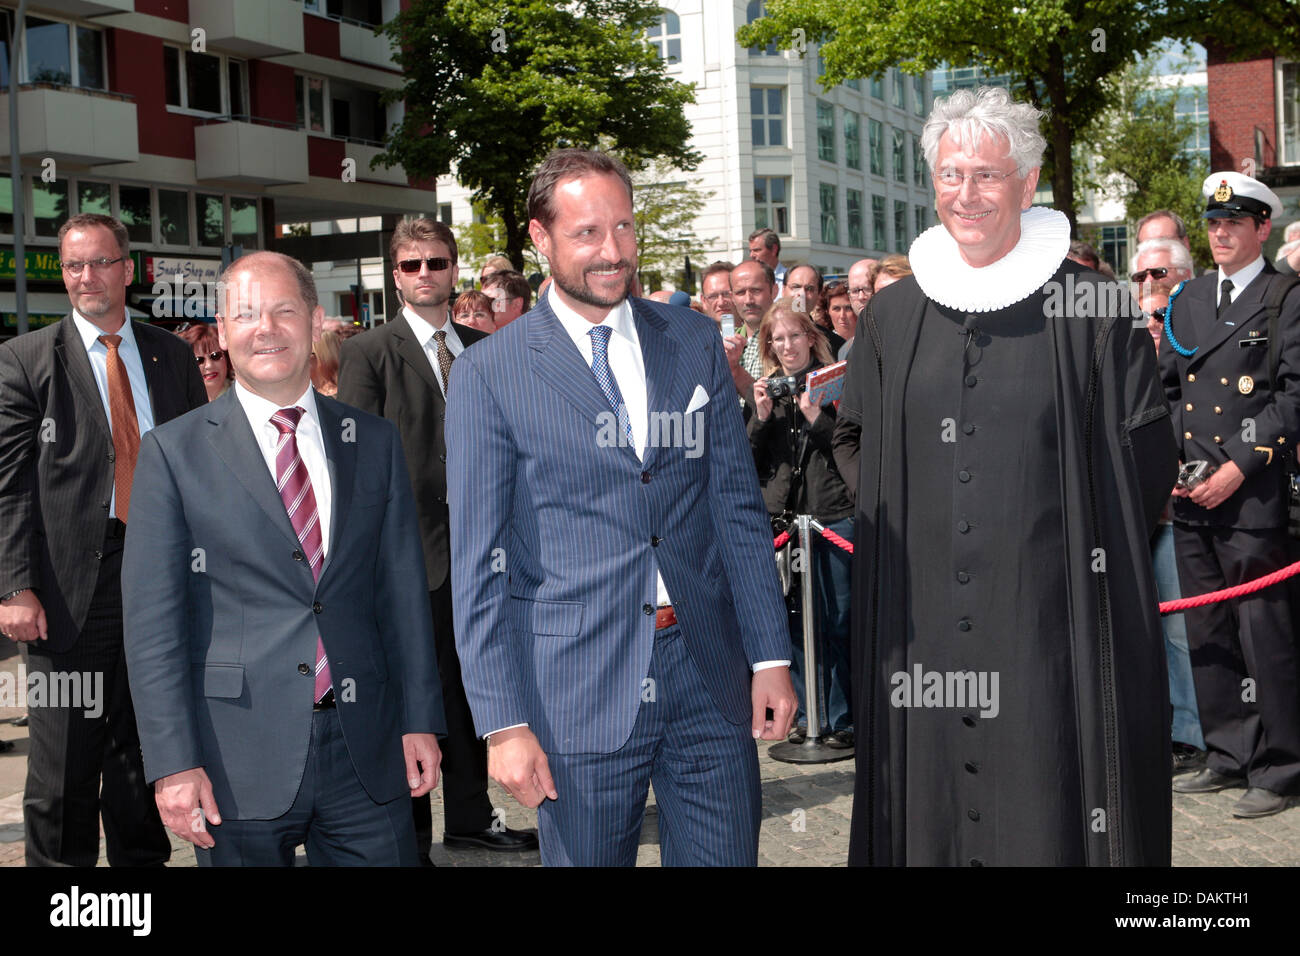 Hamburg's First Mayor Olaf Scholz (L-R), Norway's Crown Prince Haakon and St. Michaelis' senior pastor Alexander Roeder enter the main church St. Michaelis in Hamburg, Germany, 06 May 2011. Crown Prince Haakon is opening the 822nd Hafengeburtstag (annual celebration of the harbour) in Hamburg as the royal guest of honour. Photo: MARKUS SCHOLZ Stock Photo